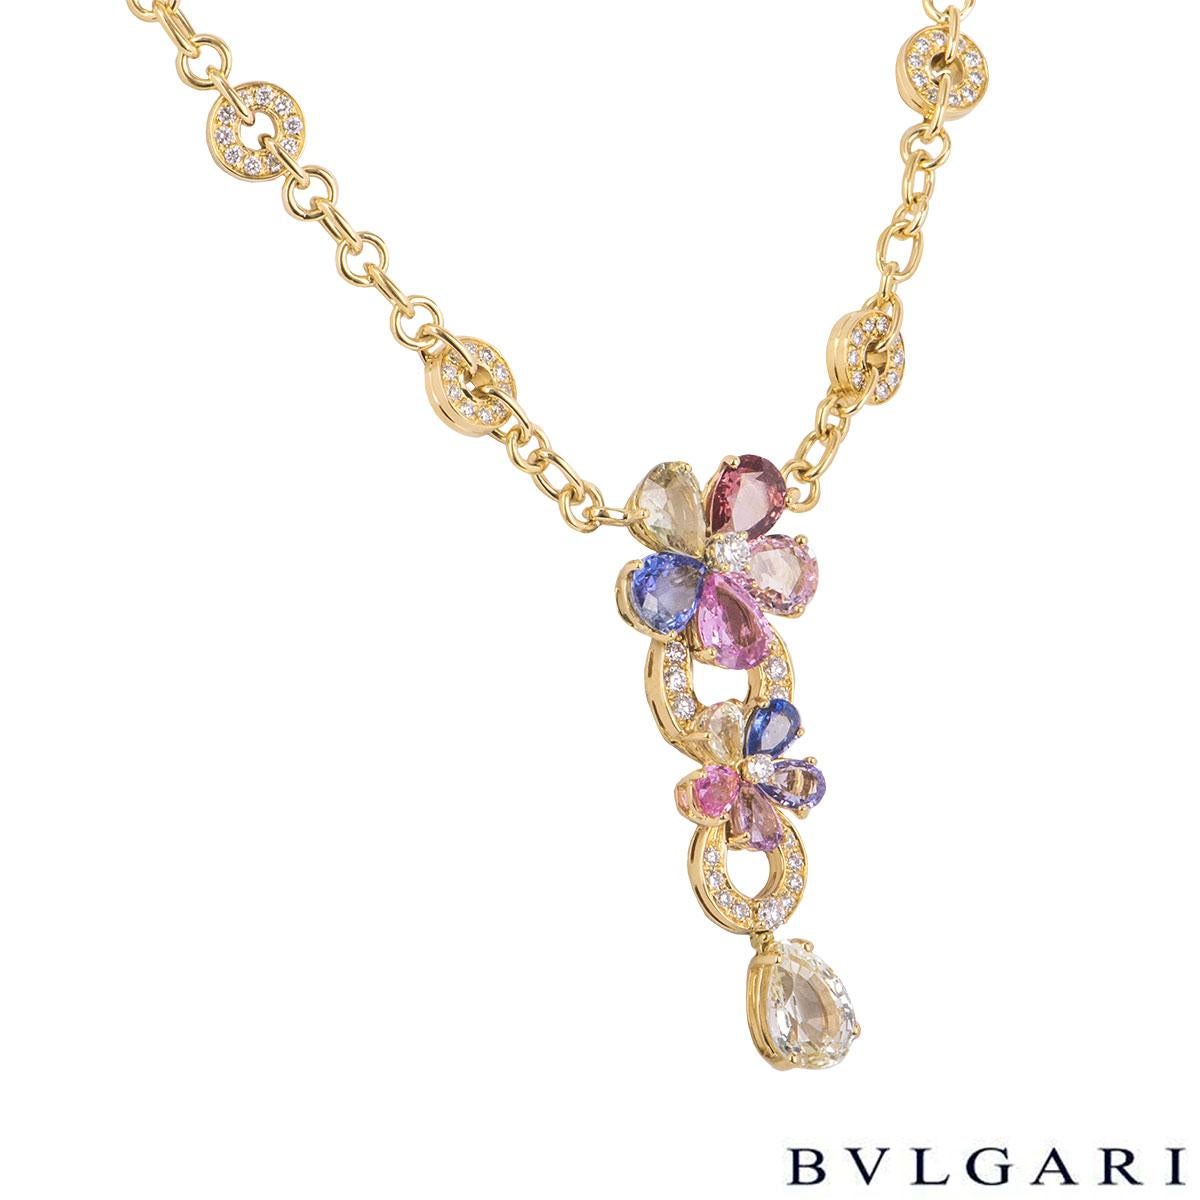 A beautiful 18k yellow gold, diamond and sapphire necklace by Bvlgari from the Sapphire Flower collection. The necklace features 2 flower motifs composed of 10 fancy coloured pear cut sapphires as petals, pave set diamonds on the iconic Bvlgari